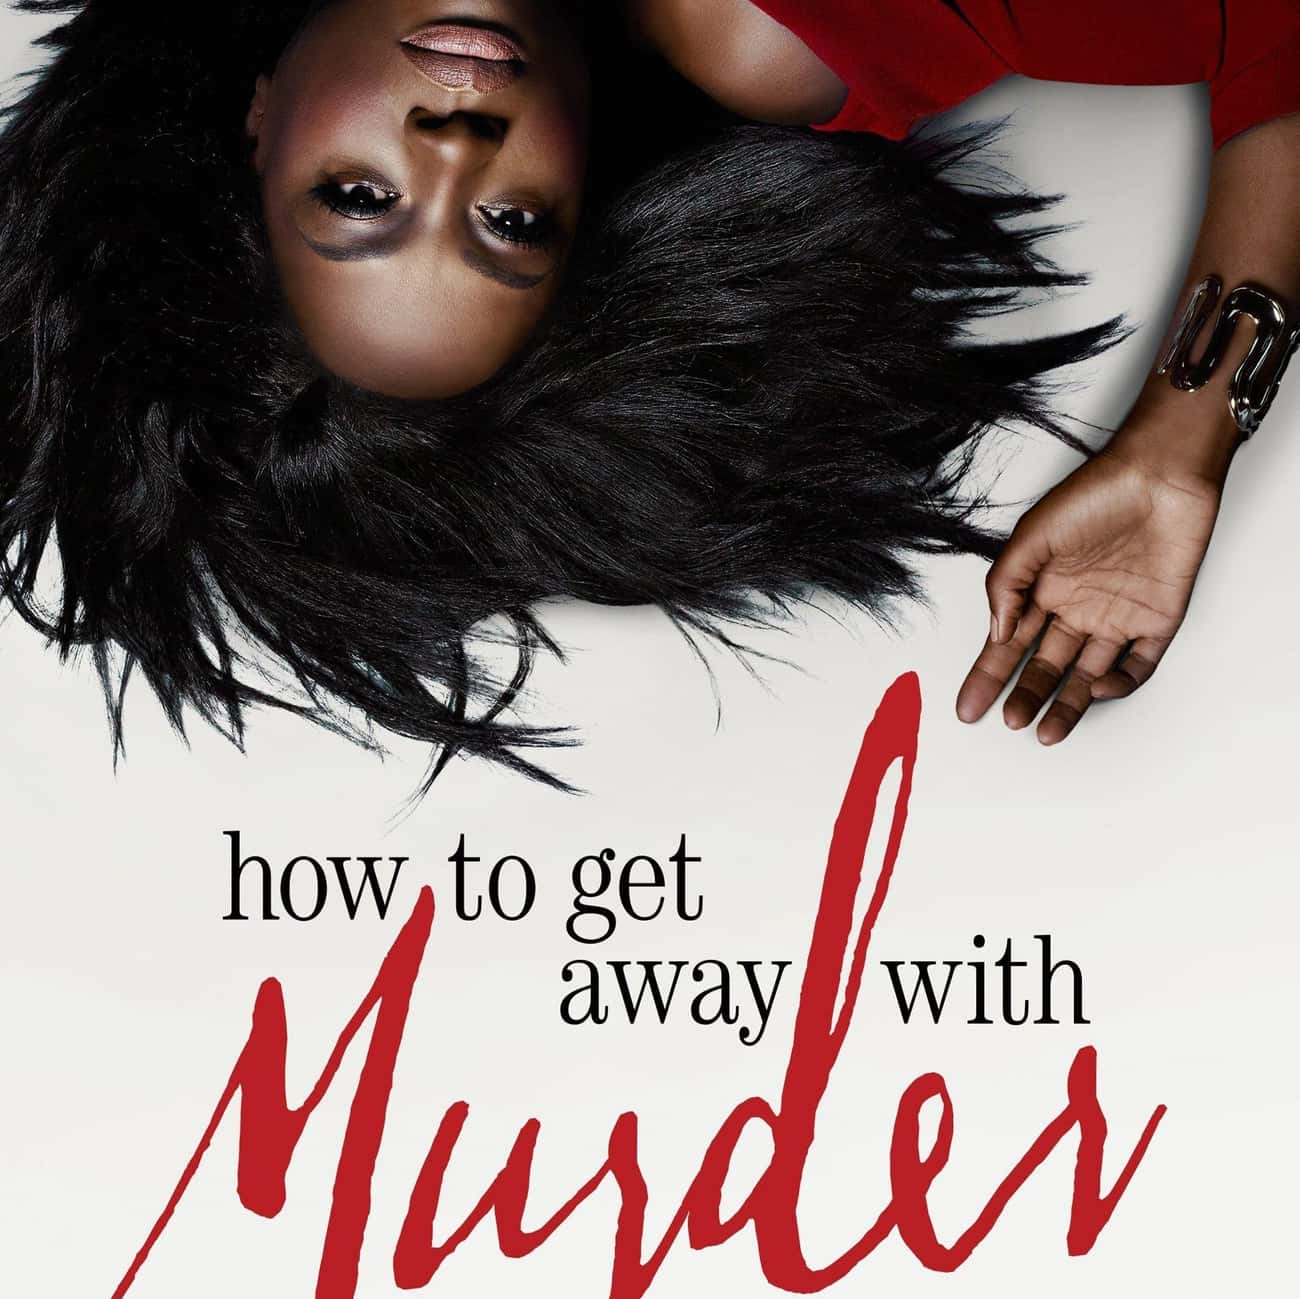 How To Get Away With Murder - Season 6